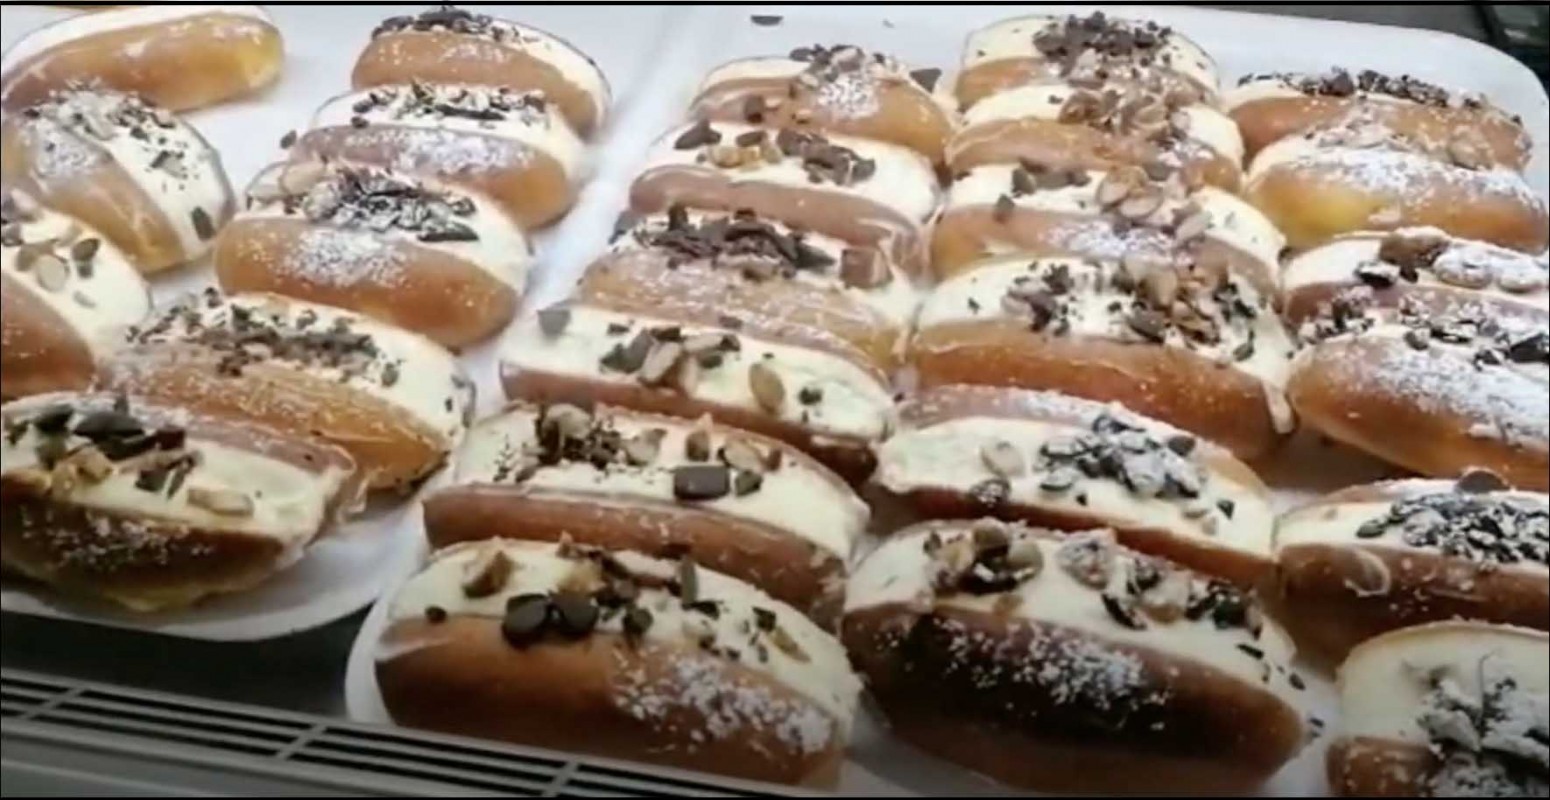 Maritozzi, a type of Italian pastry, featured in a video created by Visiting Assistant Professor of Italian Monica Straniero.